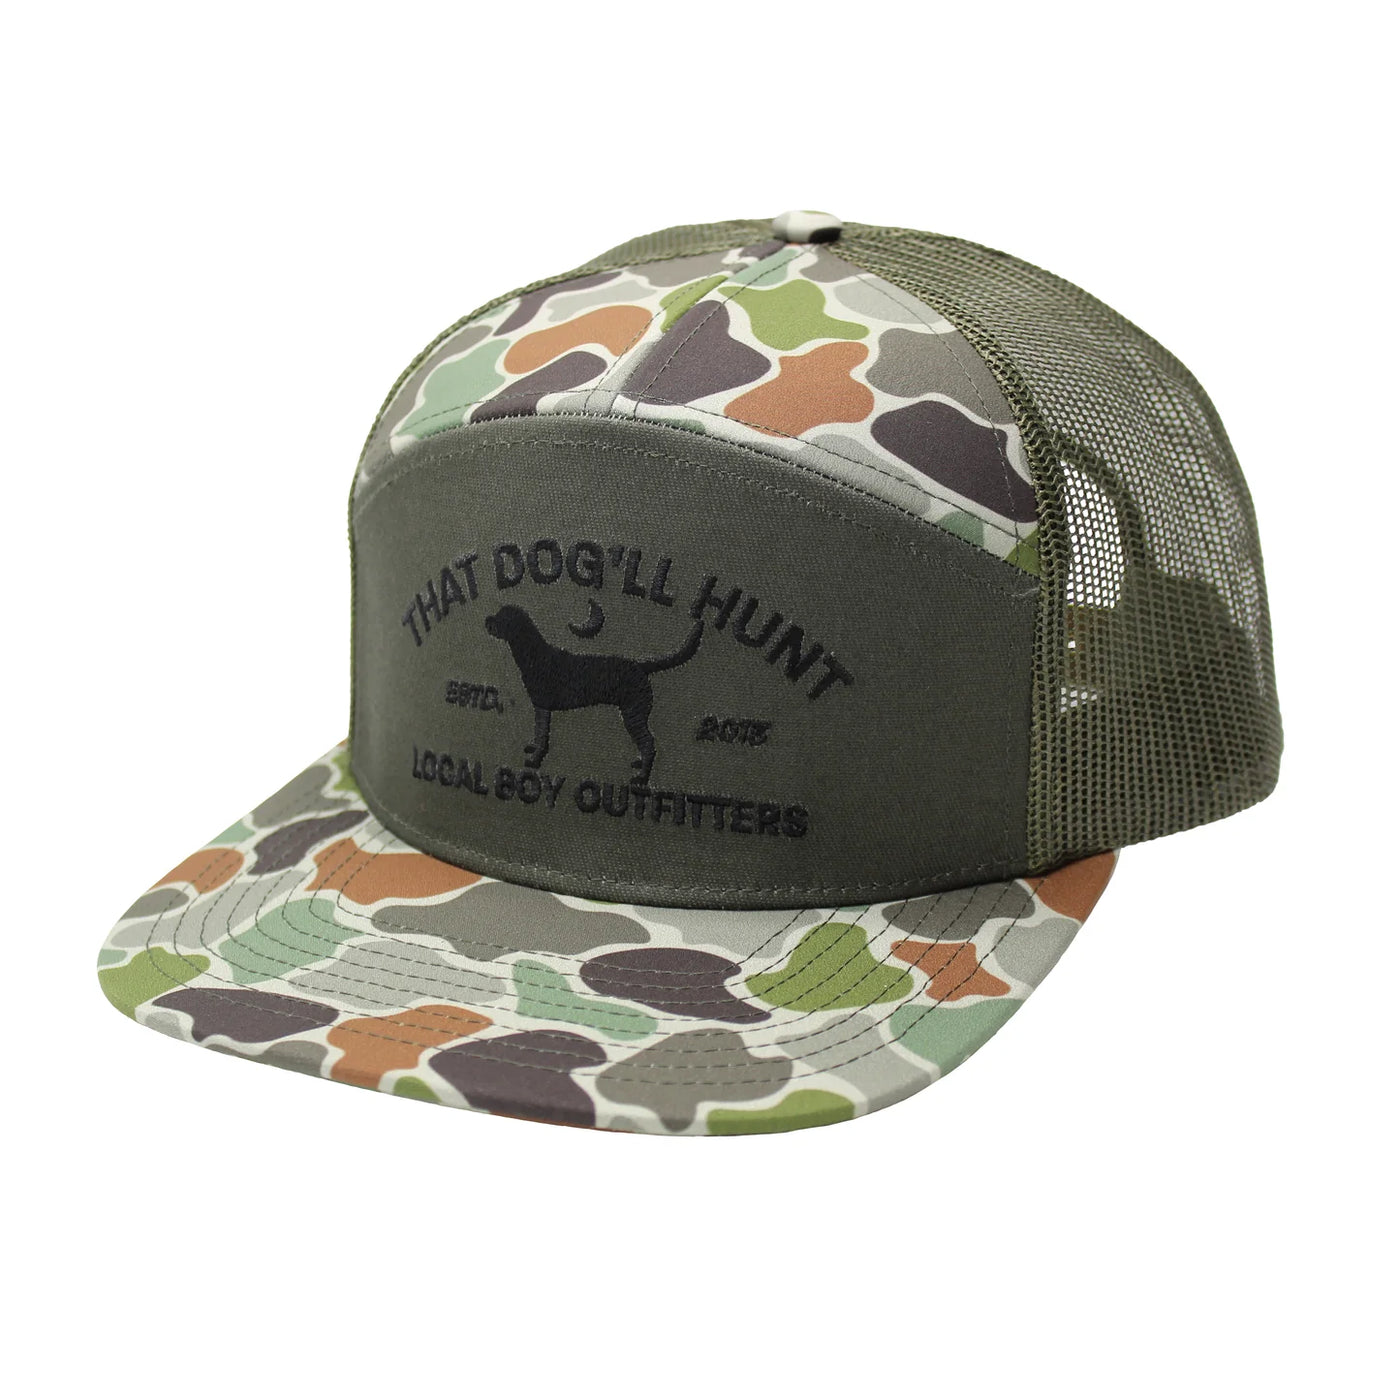 Local Boy Outfitters 7 Panel That Dog'll Hunt Camo Logan